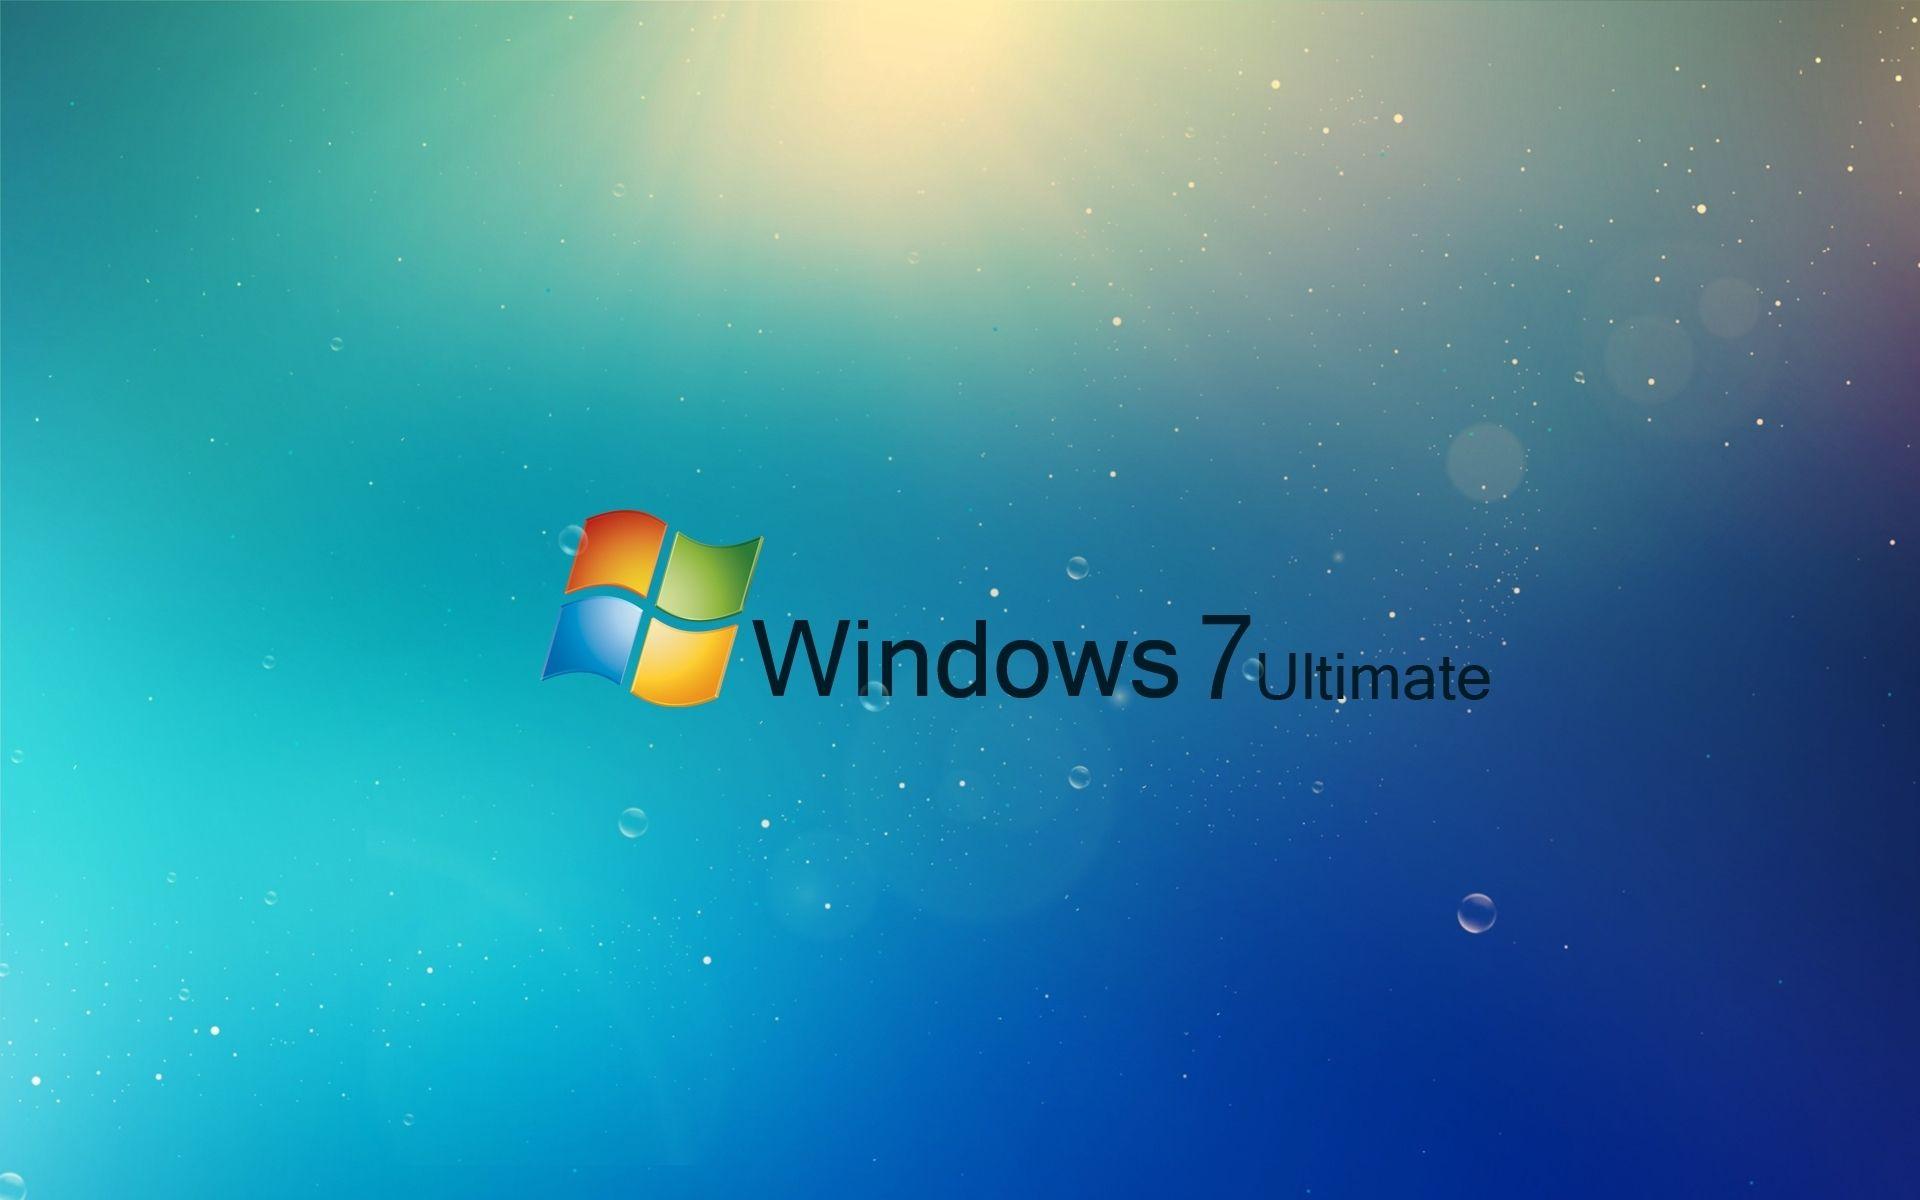 The best windows 7 ultimate themes